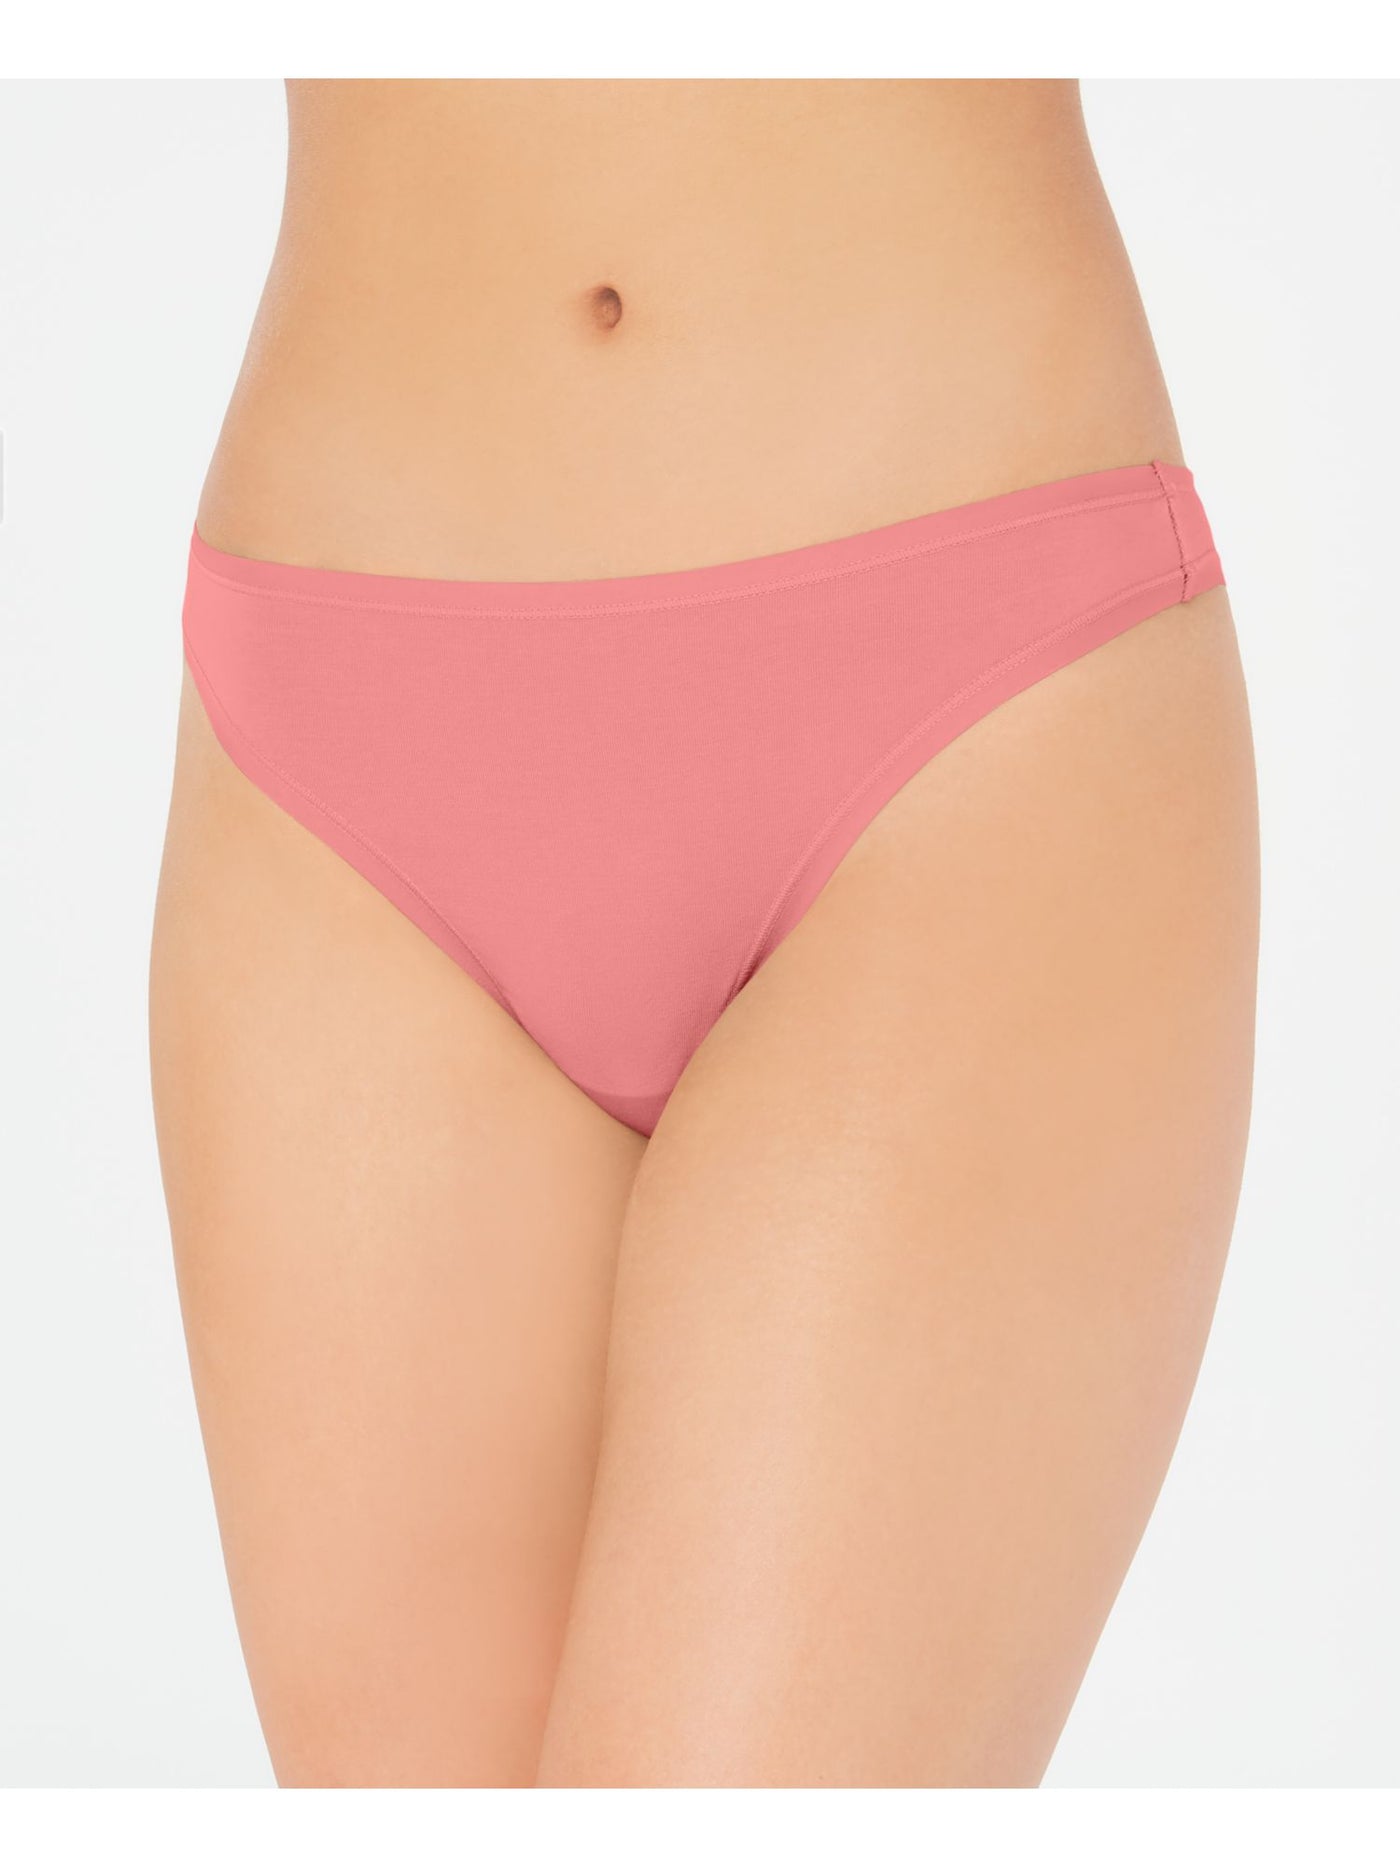 CHARTER CLUB Intimates Coral Everyday Thong Size: L